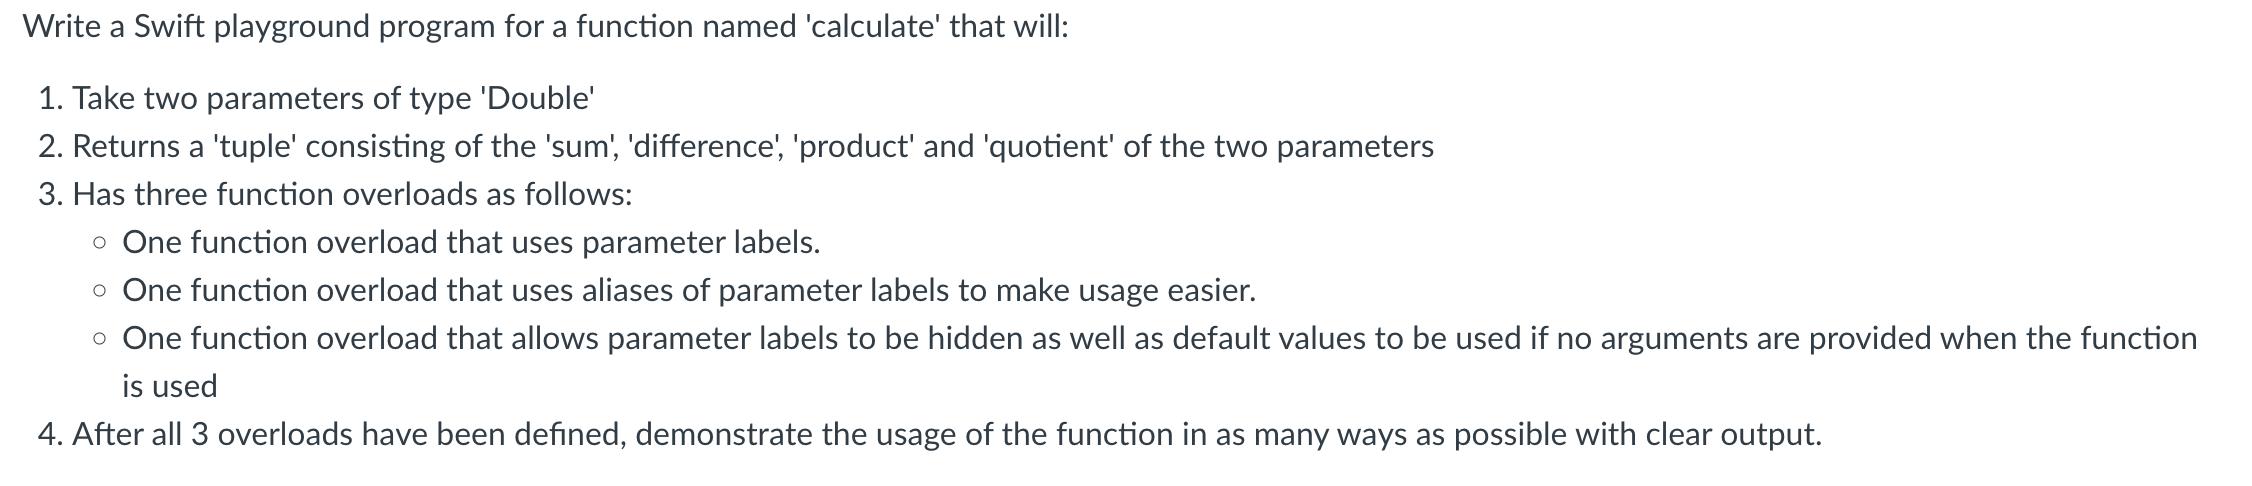 Write a Swift playground program for a function named 'calculate' that will: 1. Take two parameters of type